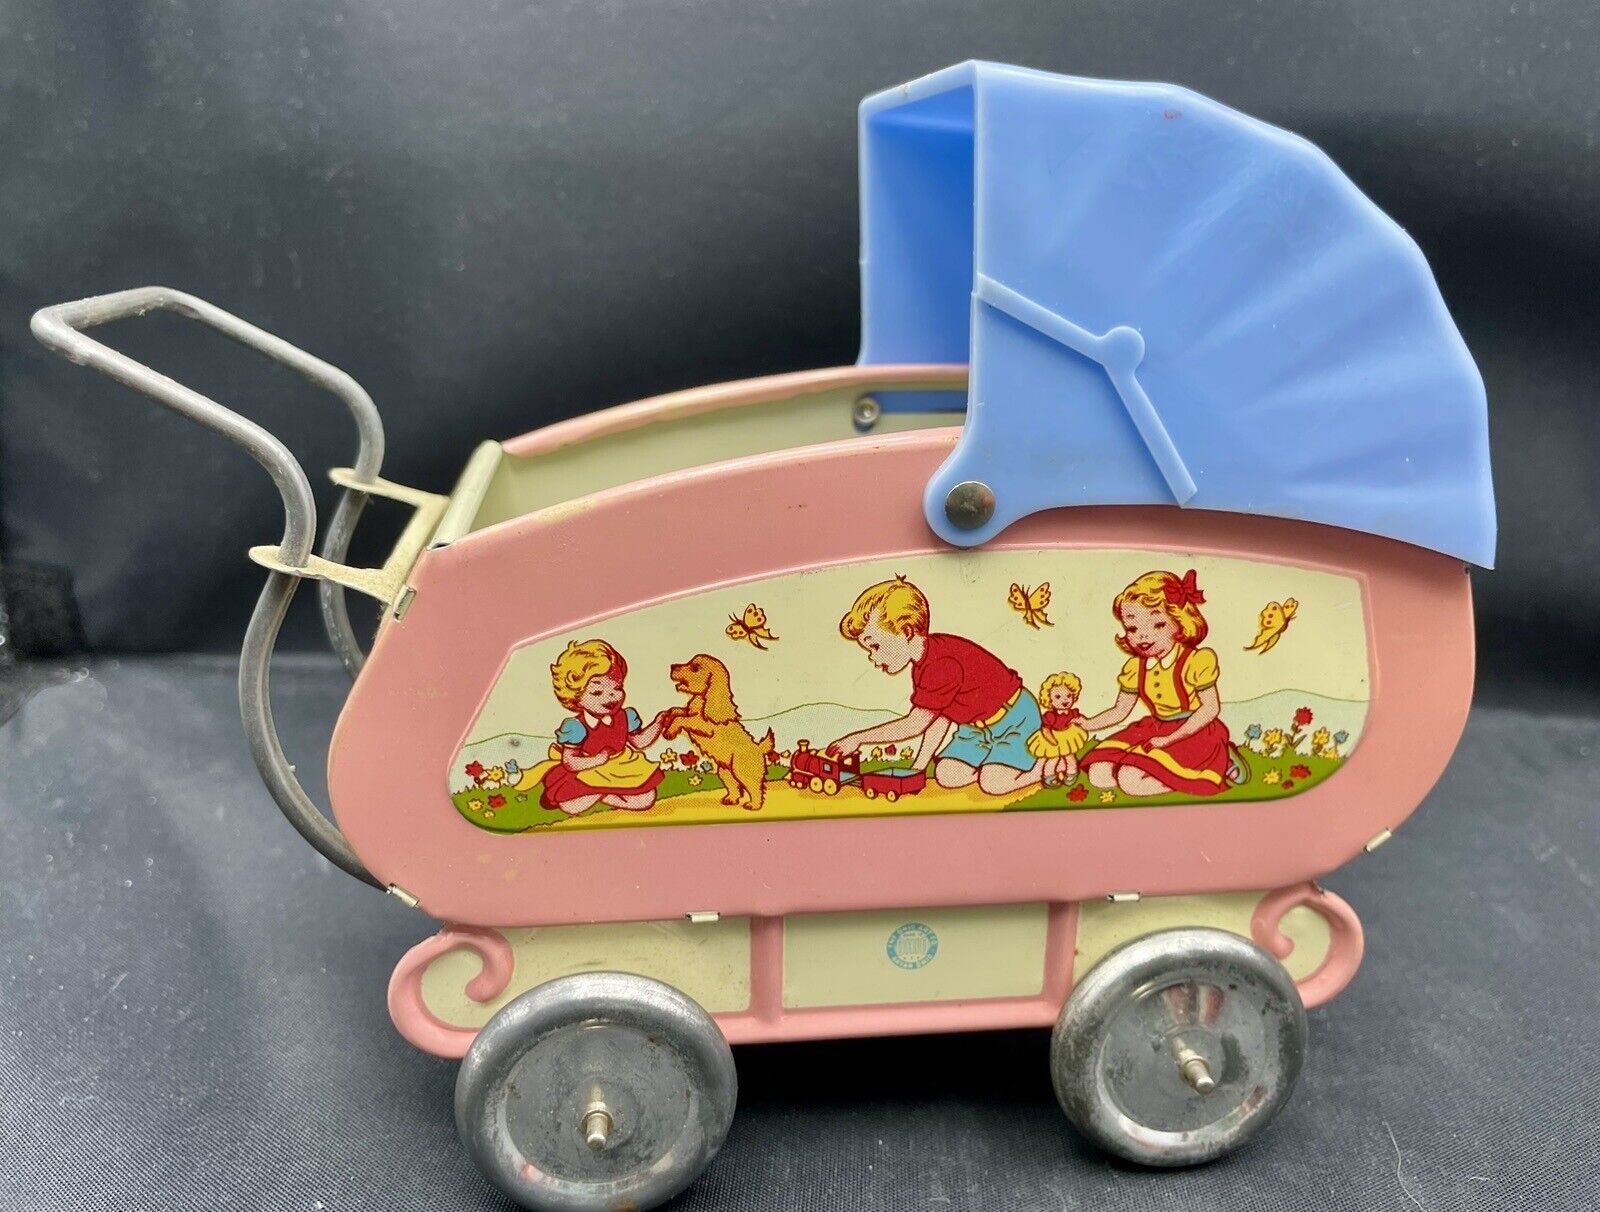 SUPERB 1950s Vintage Ohio Art Tin Litho Baby Buggy Carriage Stroller Lithograph